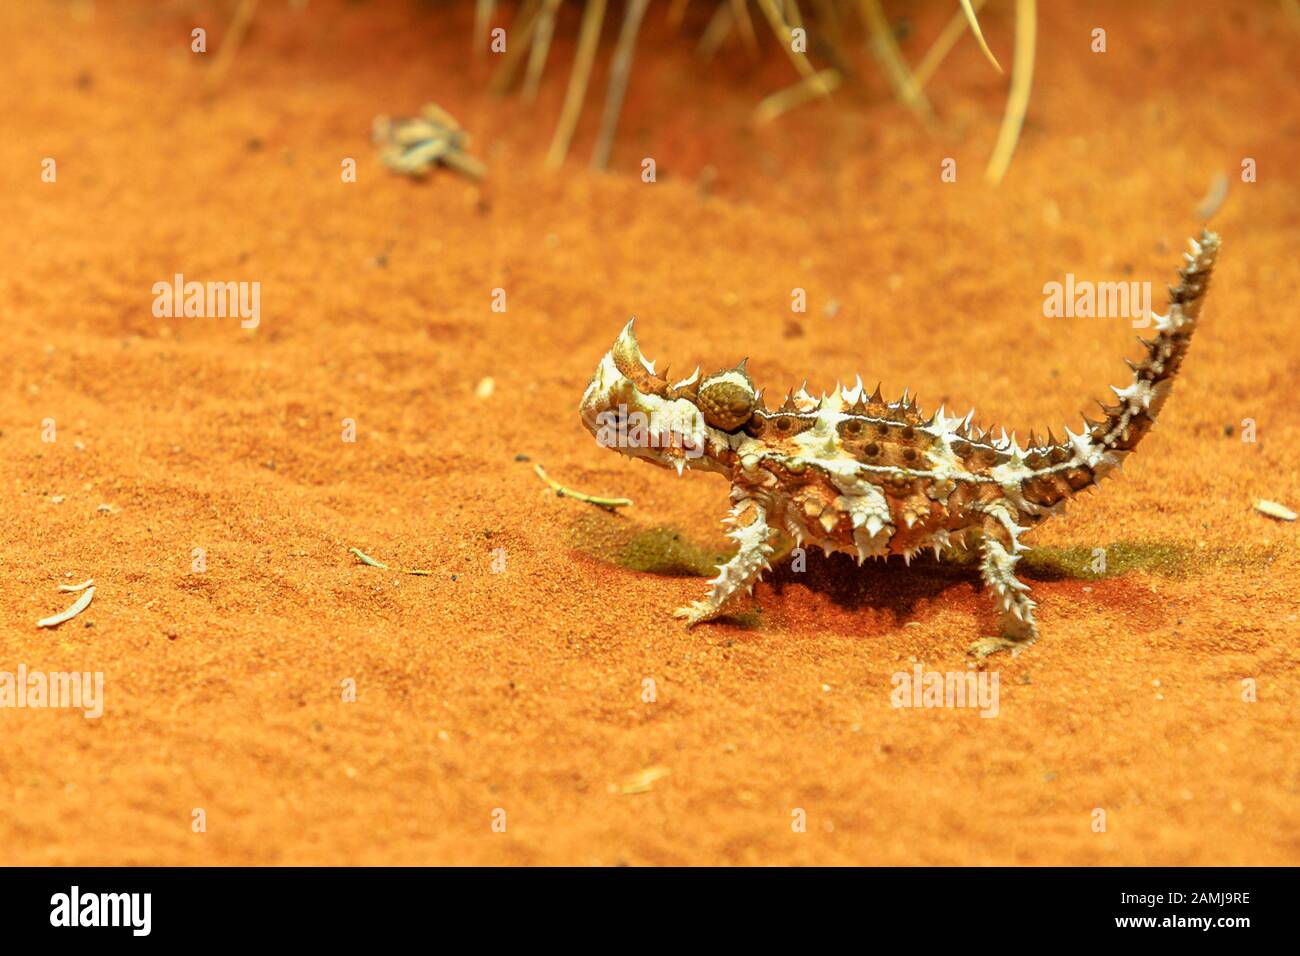 Thorny devil, Moloch horridus, walks on red sand in Desert Park at Alice Springs, Northern Territory, Central Australia. Insectivorous, they feed on Stock Photo